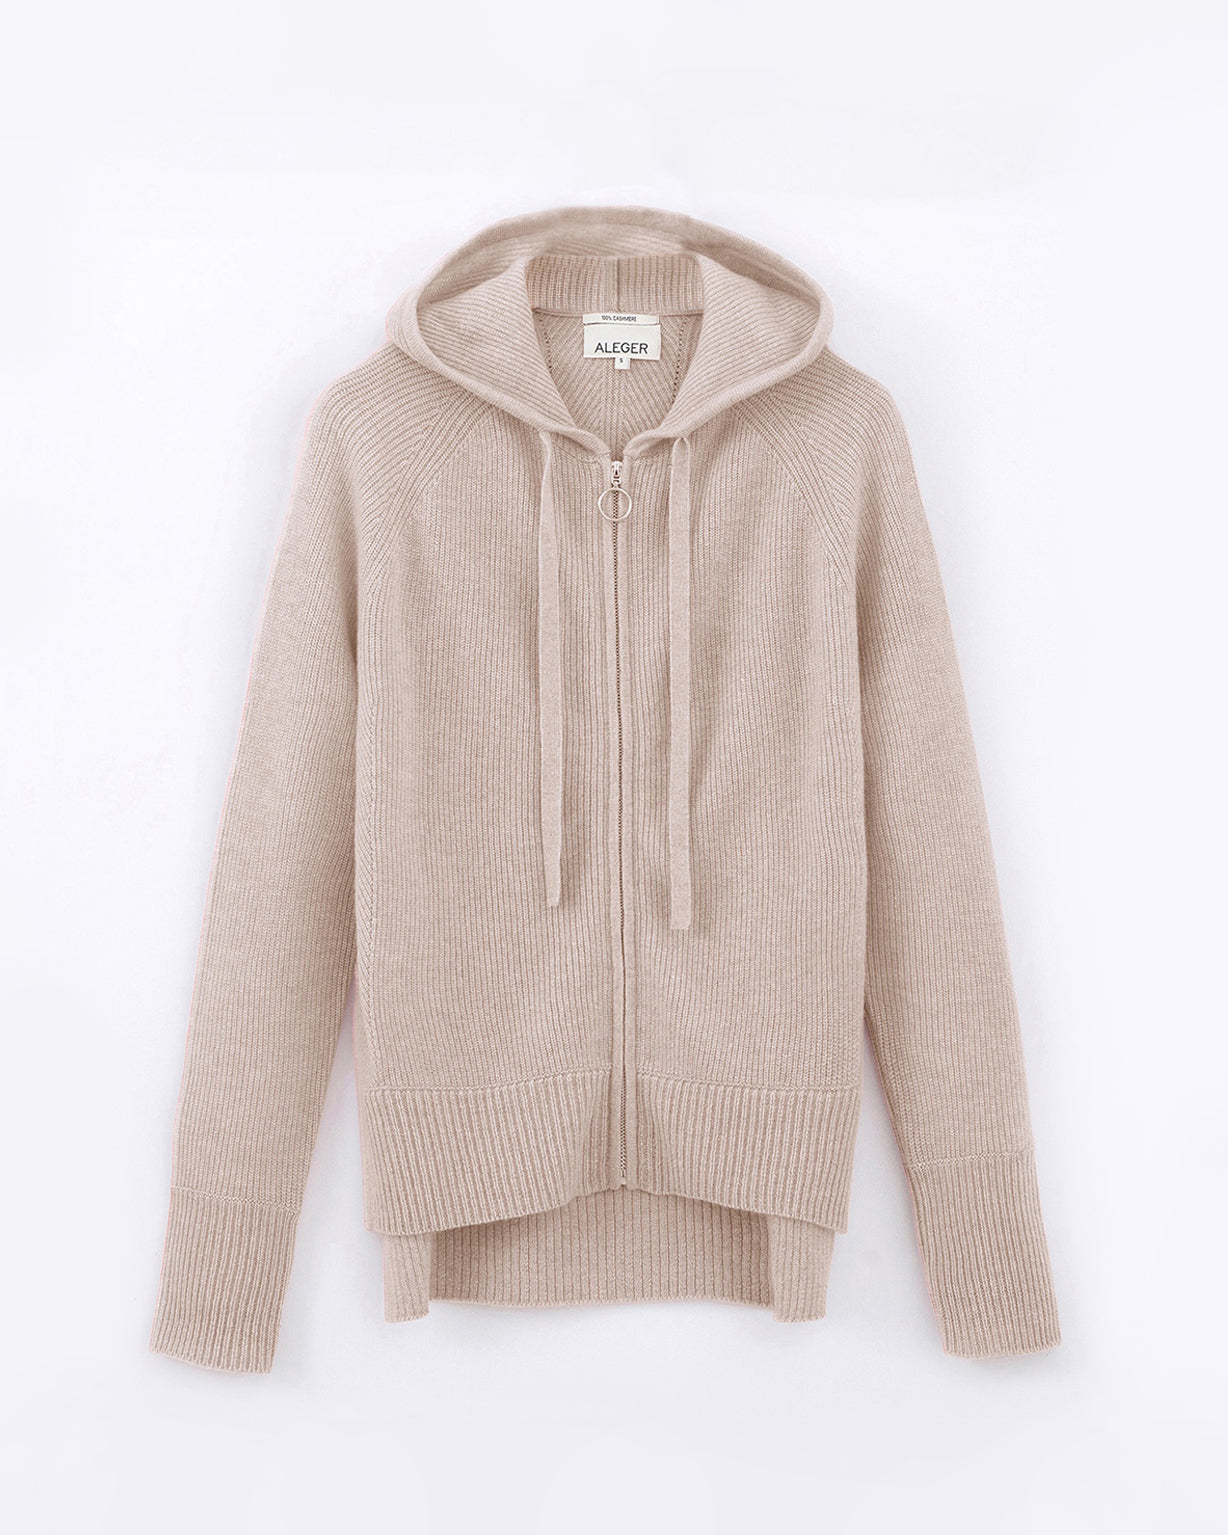 N.16 ALEGER 100% Cashmere Zip Hoody Cardigan - CHAMPAGNE-- XS, L  Left